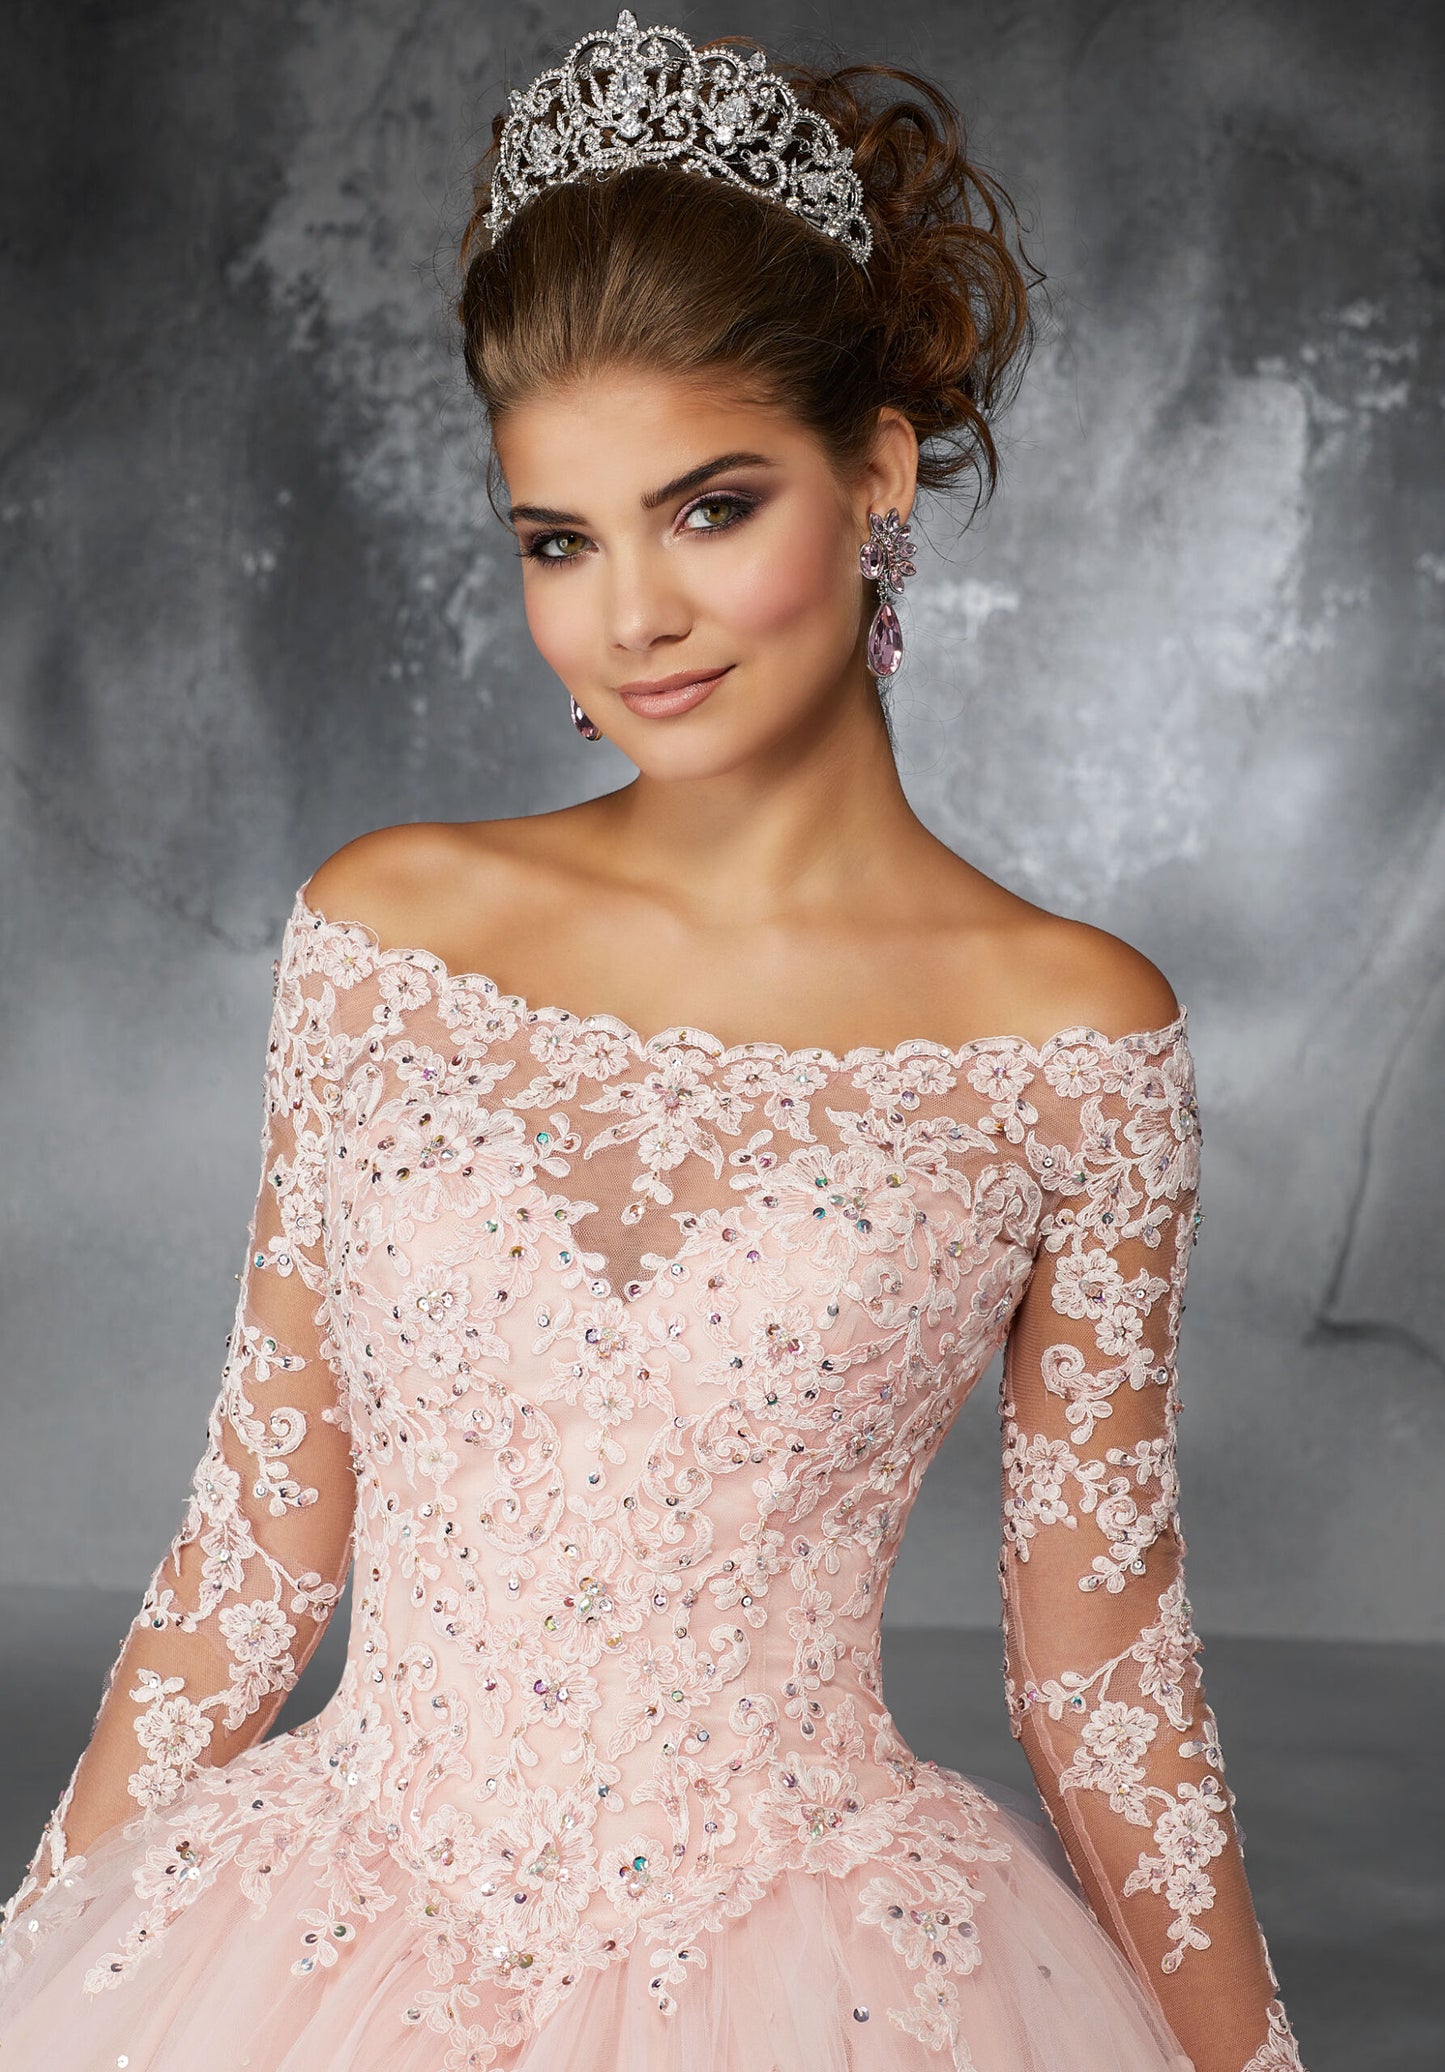 Beaded Lace Appliqués on a Tulle Ballgown Skirt #60052